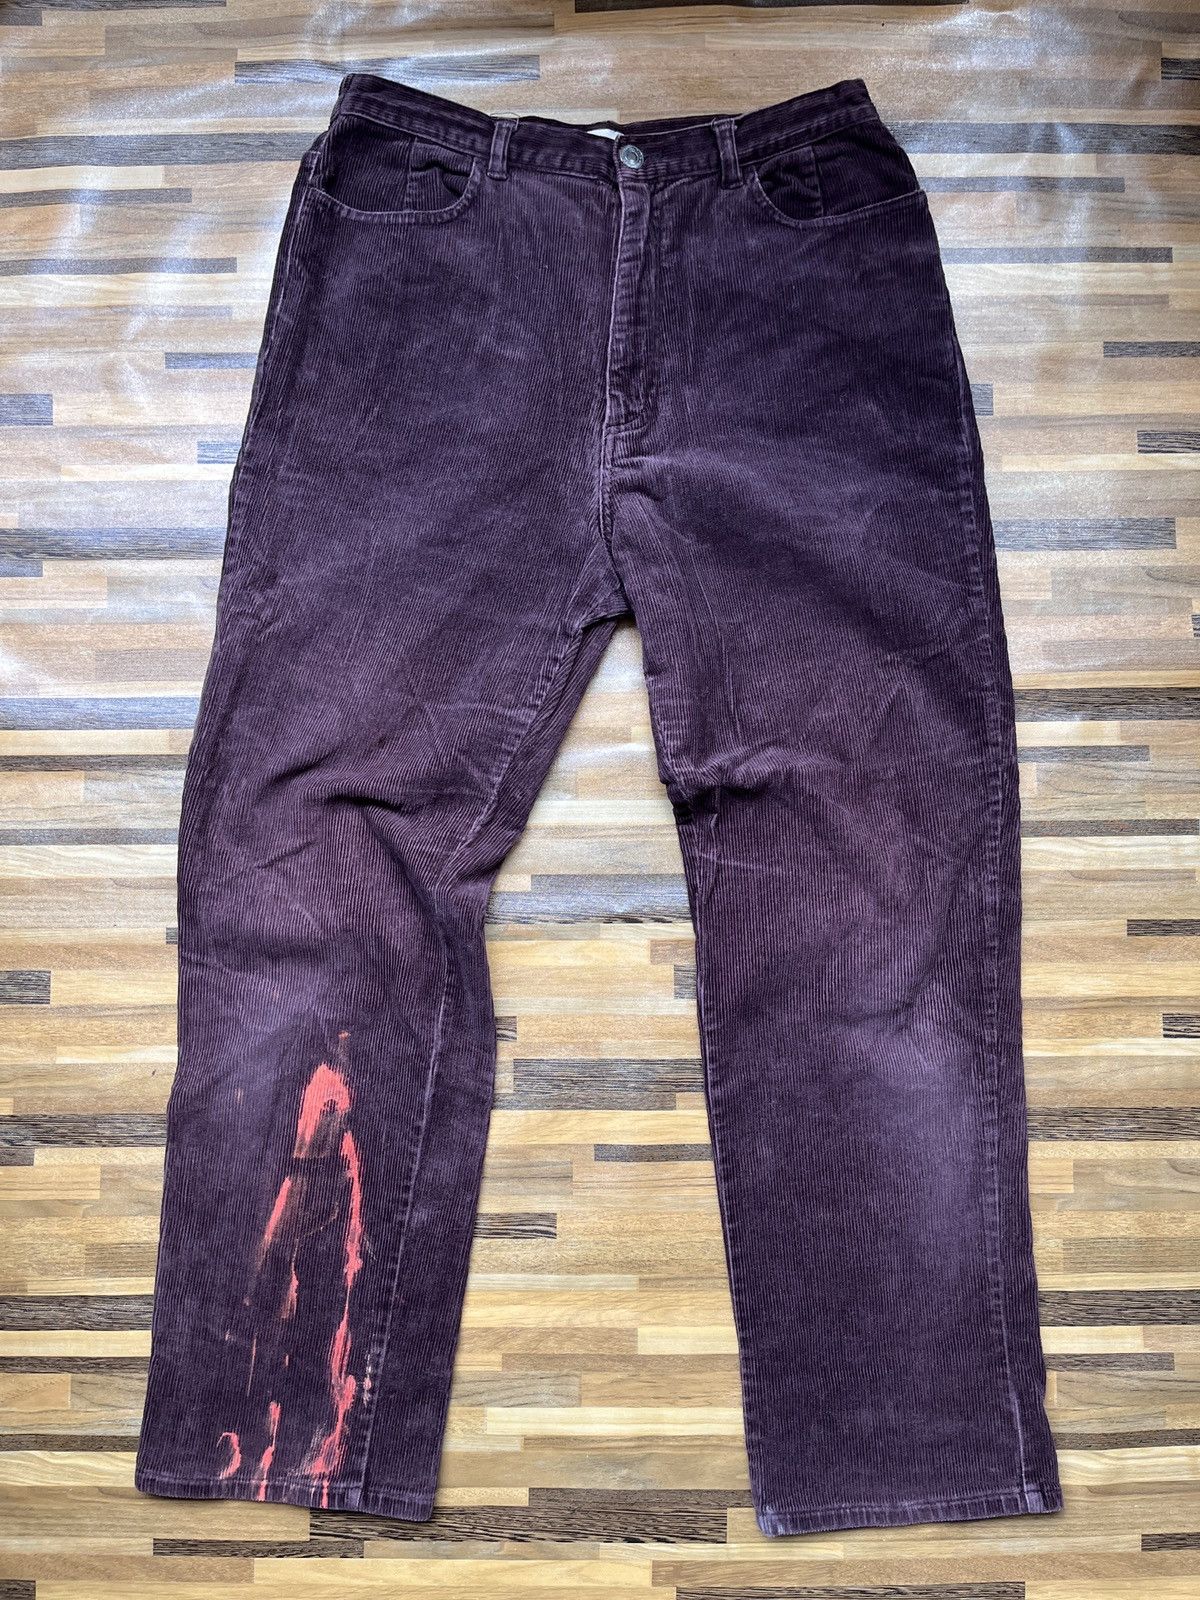 Issey Miyake - IY Grace Issey Japanese Brand Jeans Paints Splatters - 15